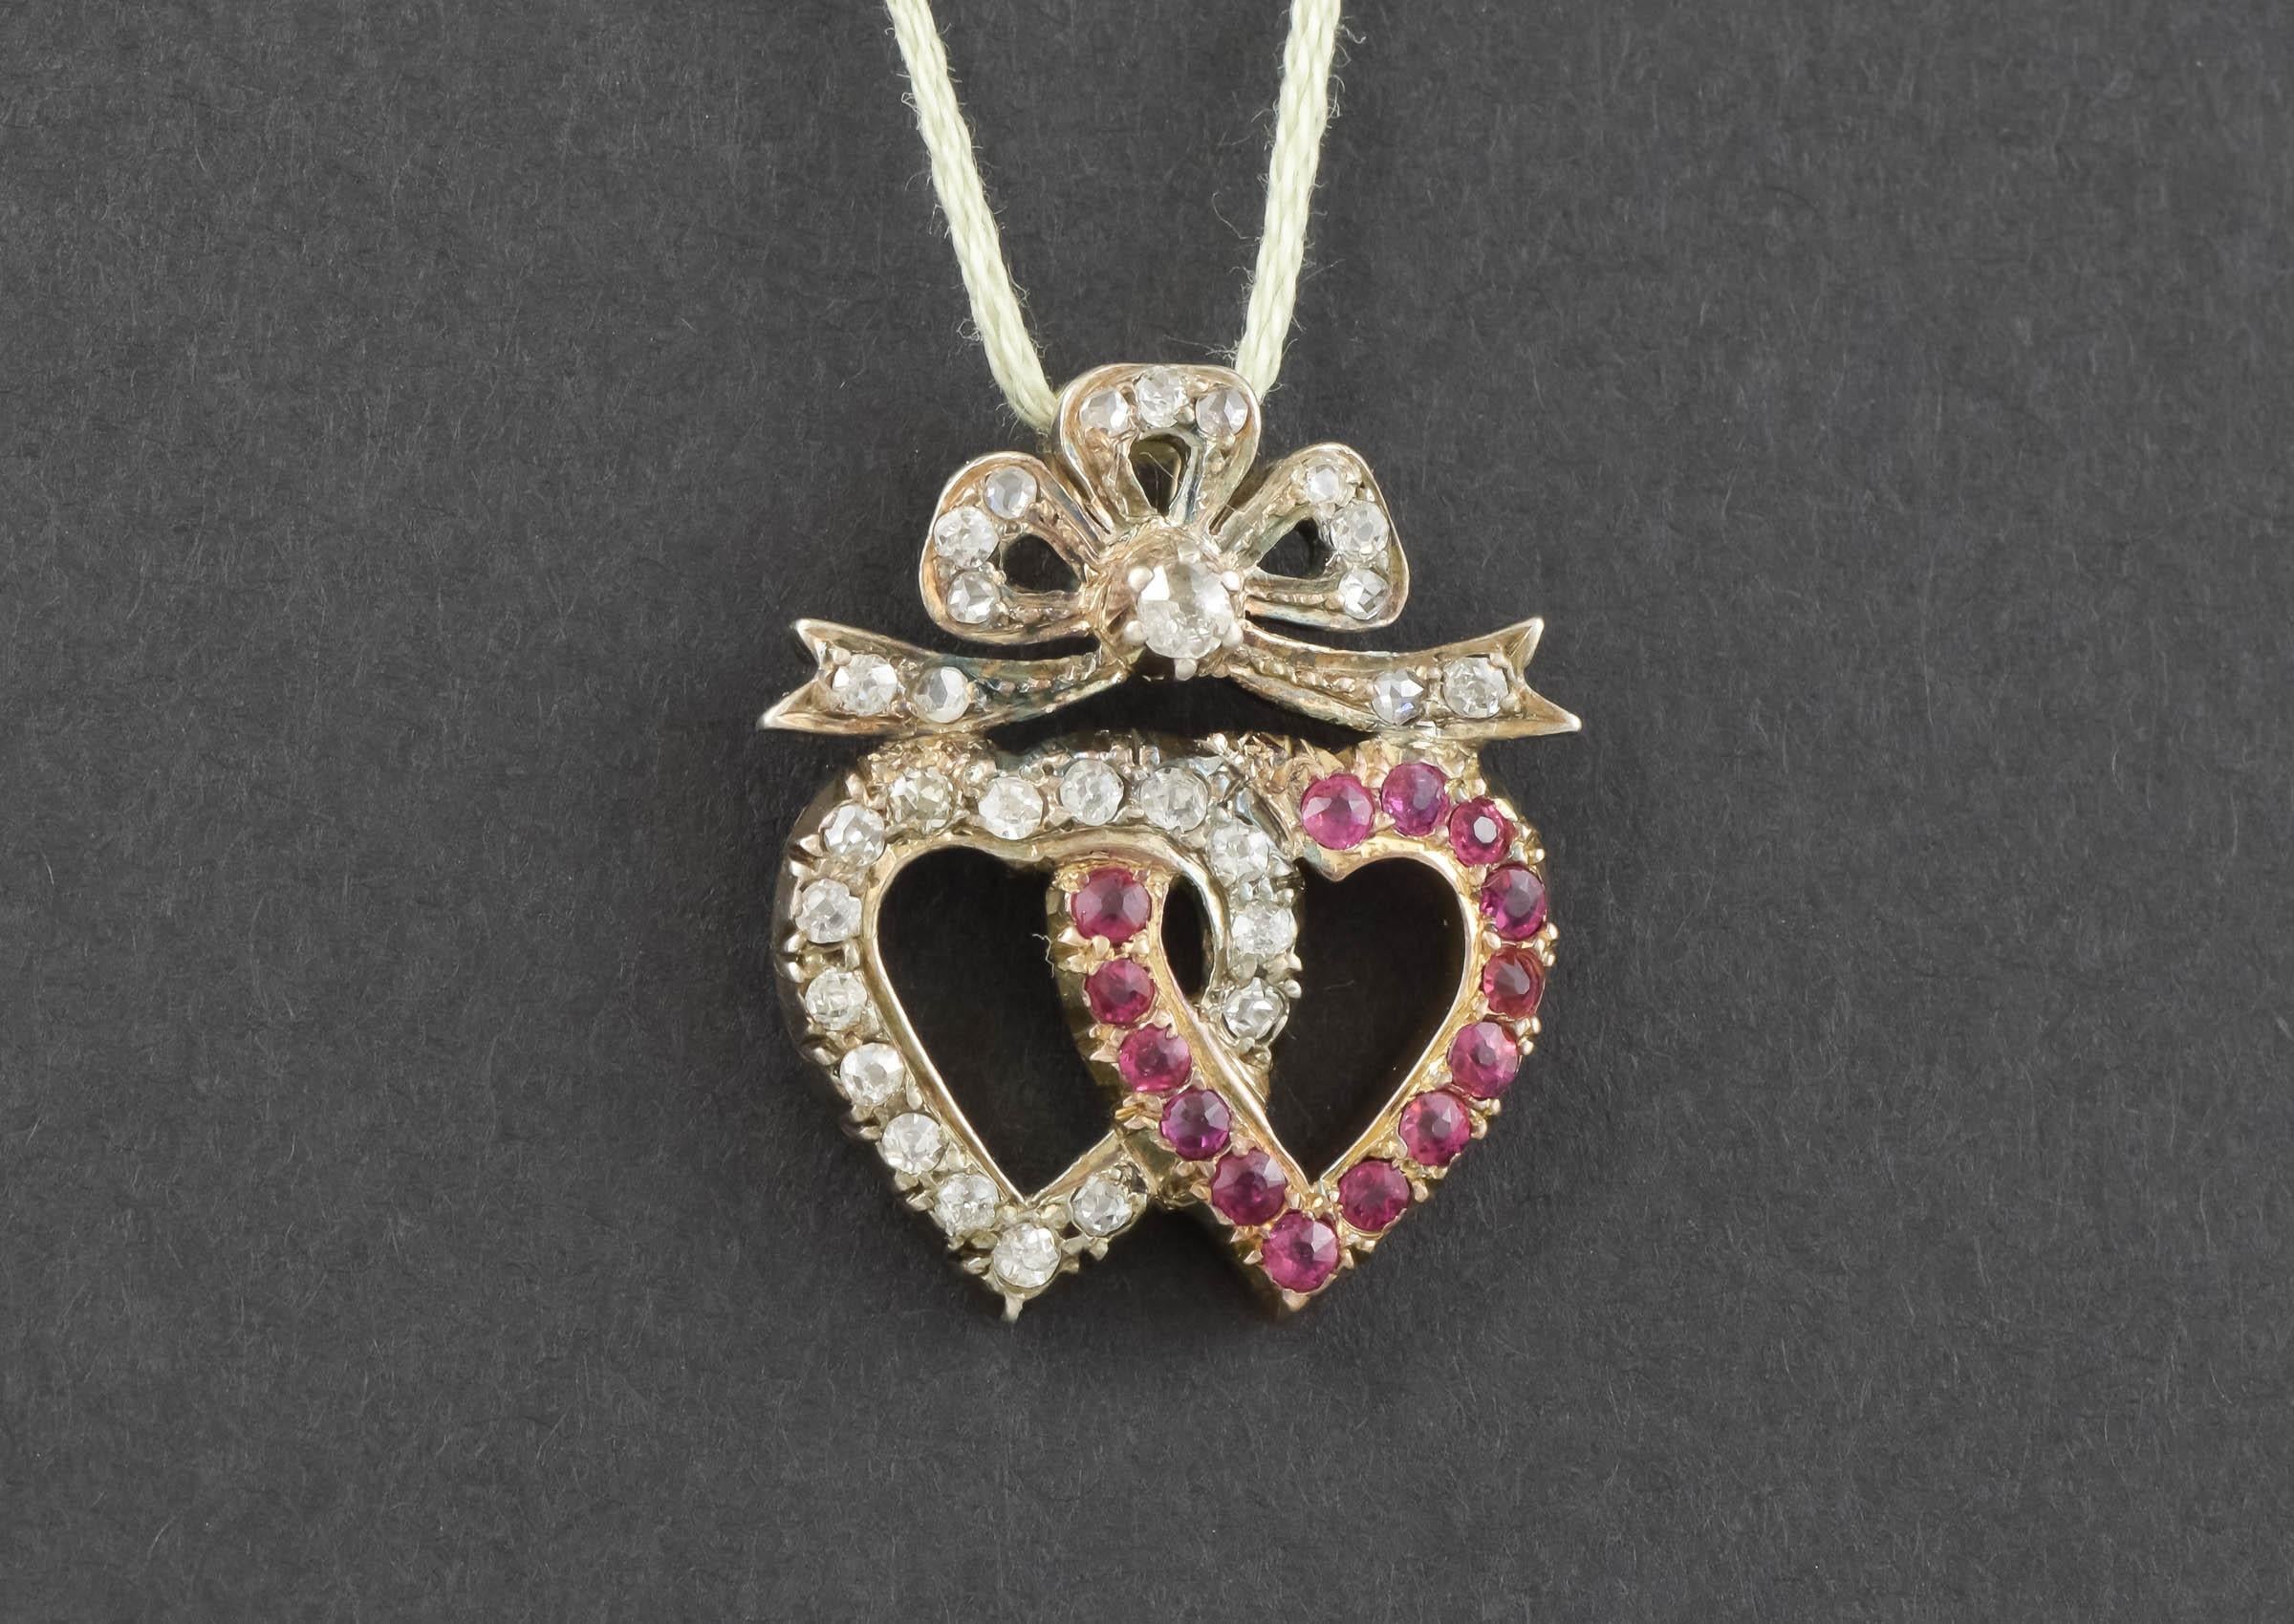 Antique Double Heart Pendant with Diamond & Rubies - approx 1.04 tcw For Sale 4